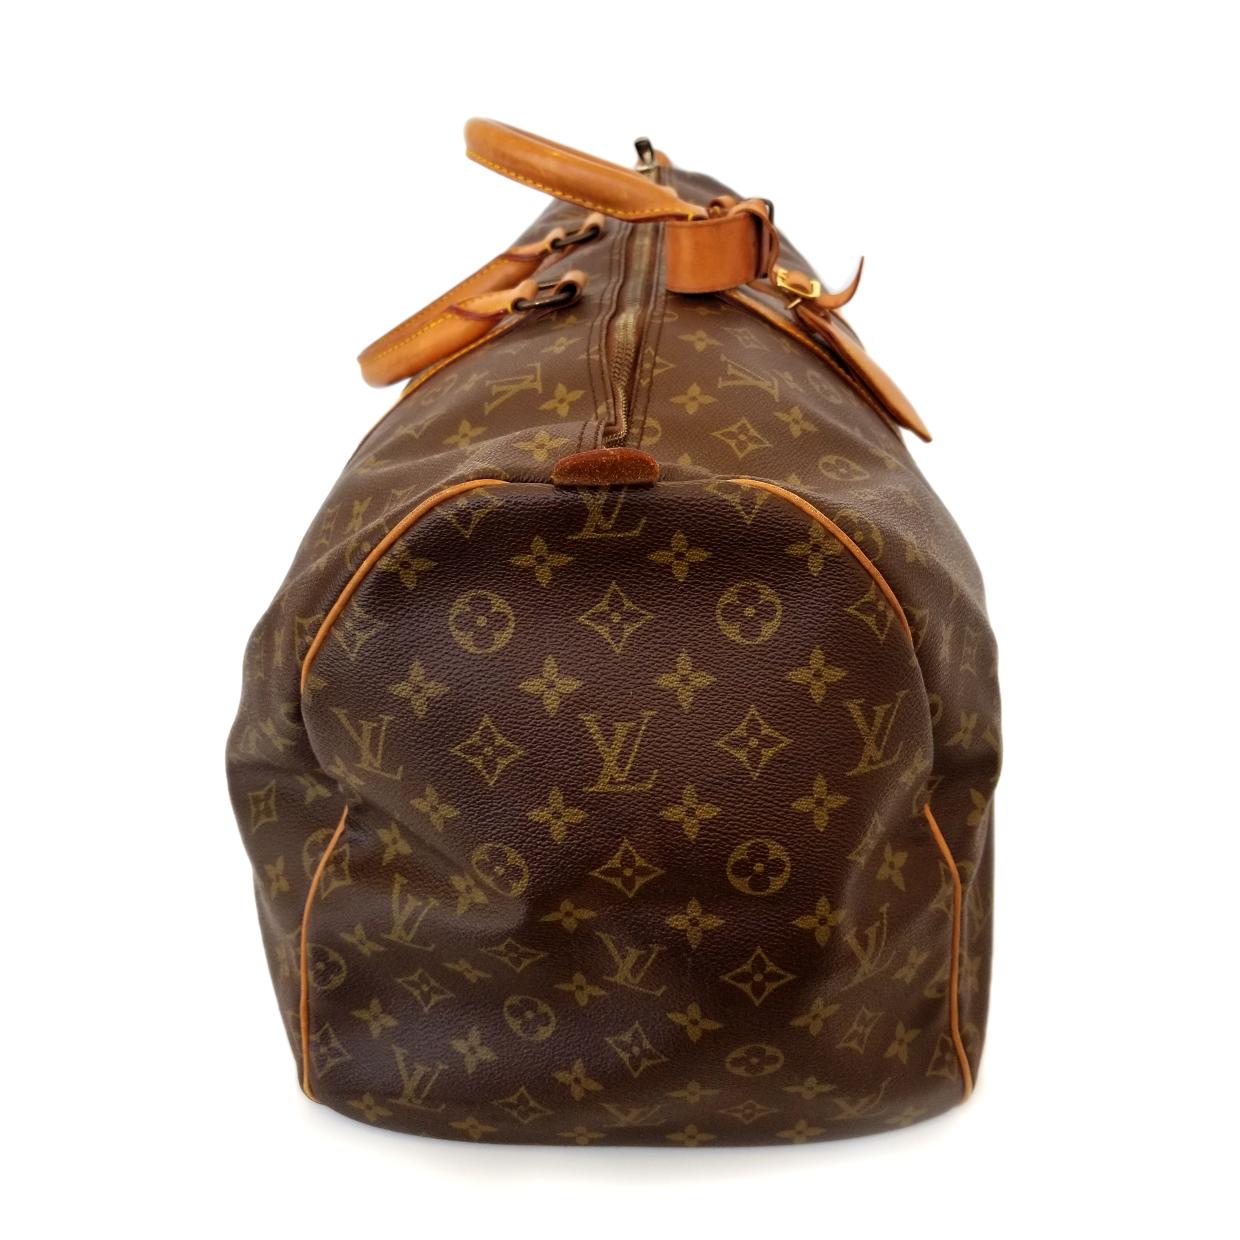 Brand - Louis Vuitton
Collection - Keepall 55
Estimated Retail - $1,990.00
Style - Duffle
Material - Canvas
Color - Brown
Pattern - Monogram
Closure - Zip
Hardware Material - Goldtone
Model/Date Code - SD 842
Size - Extra Large
Feature - Luggage